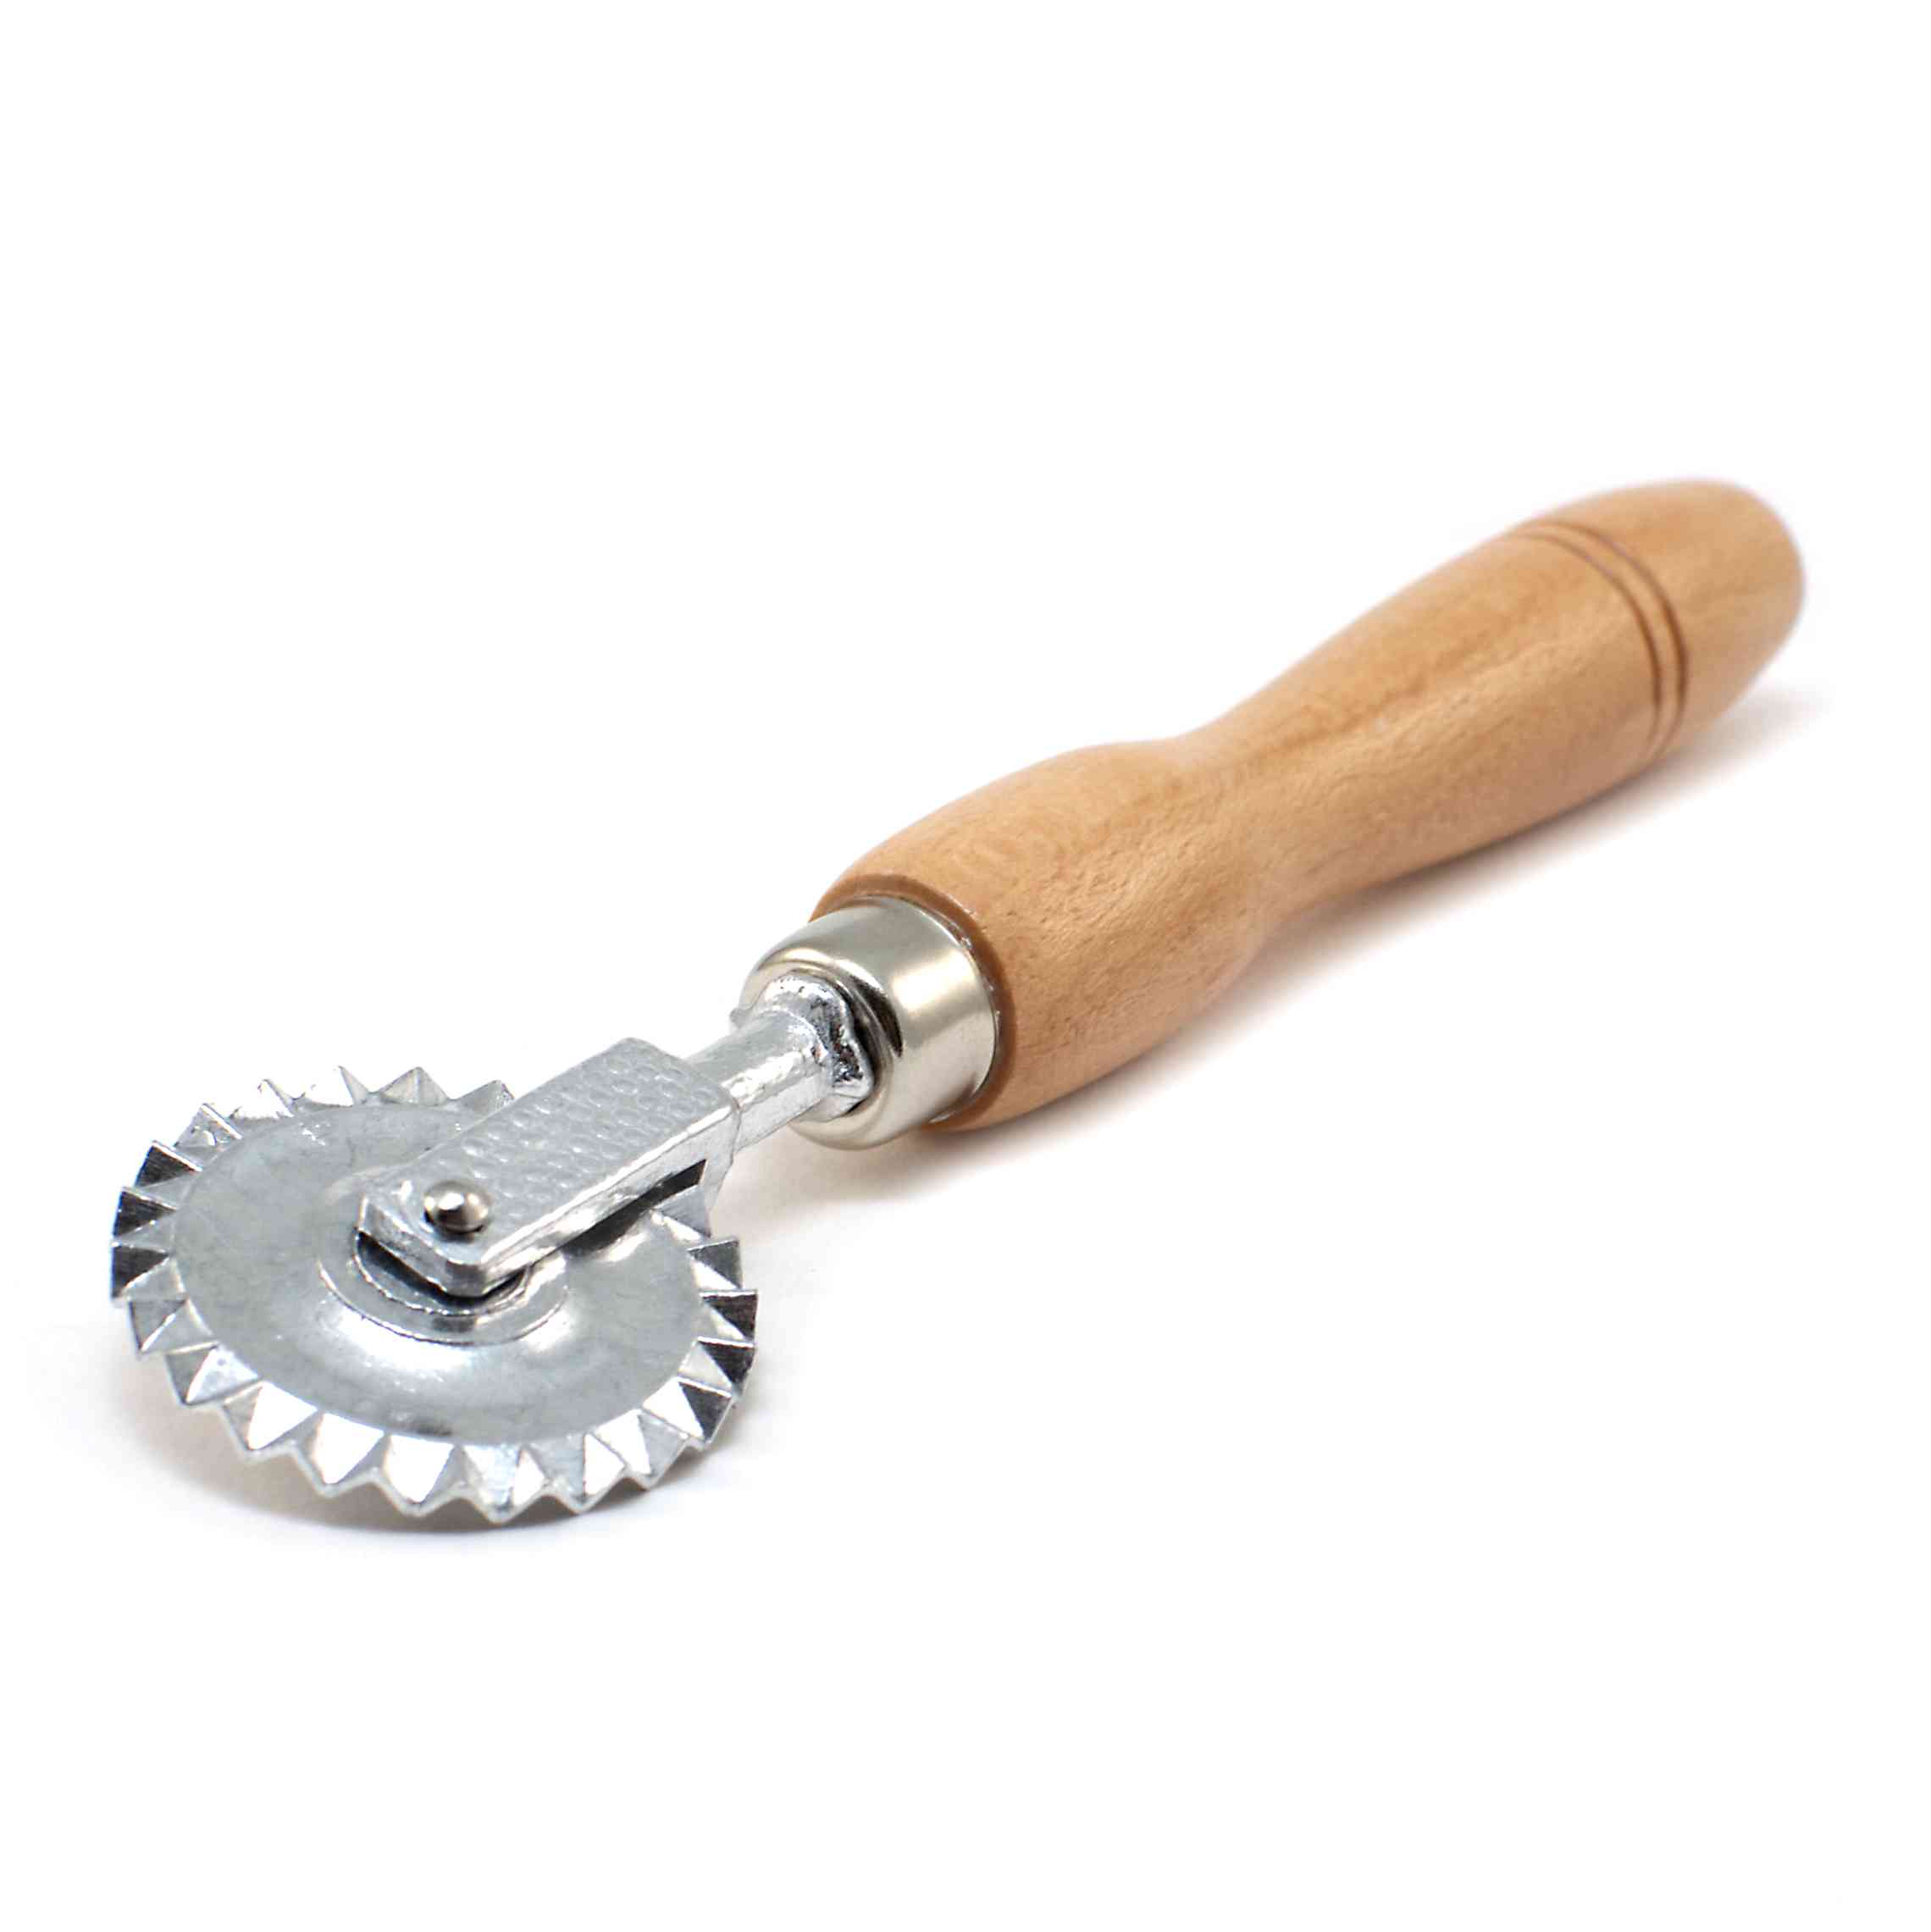 Straight Pastry / Pasta Wheel Cutter with Aluminium Wheel and